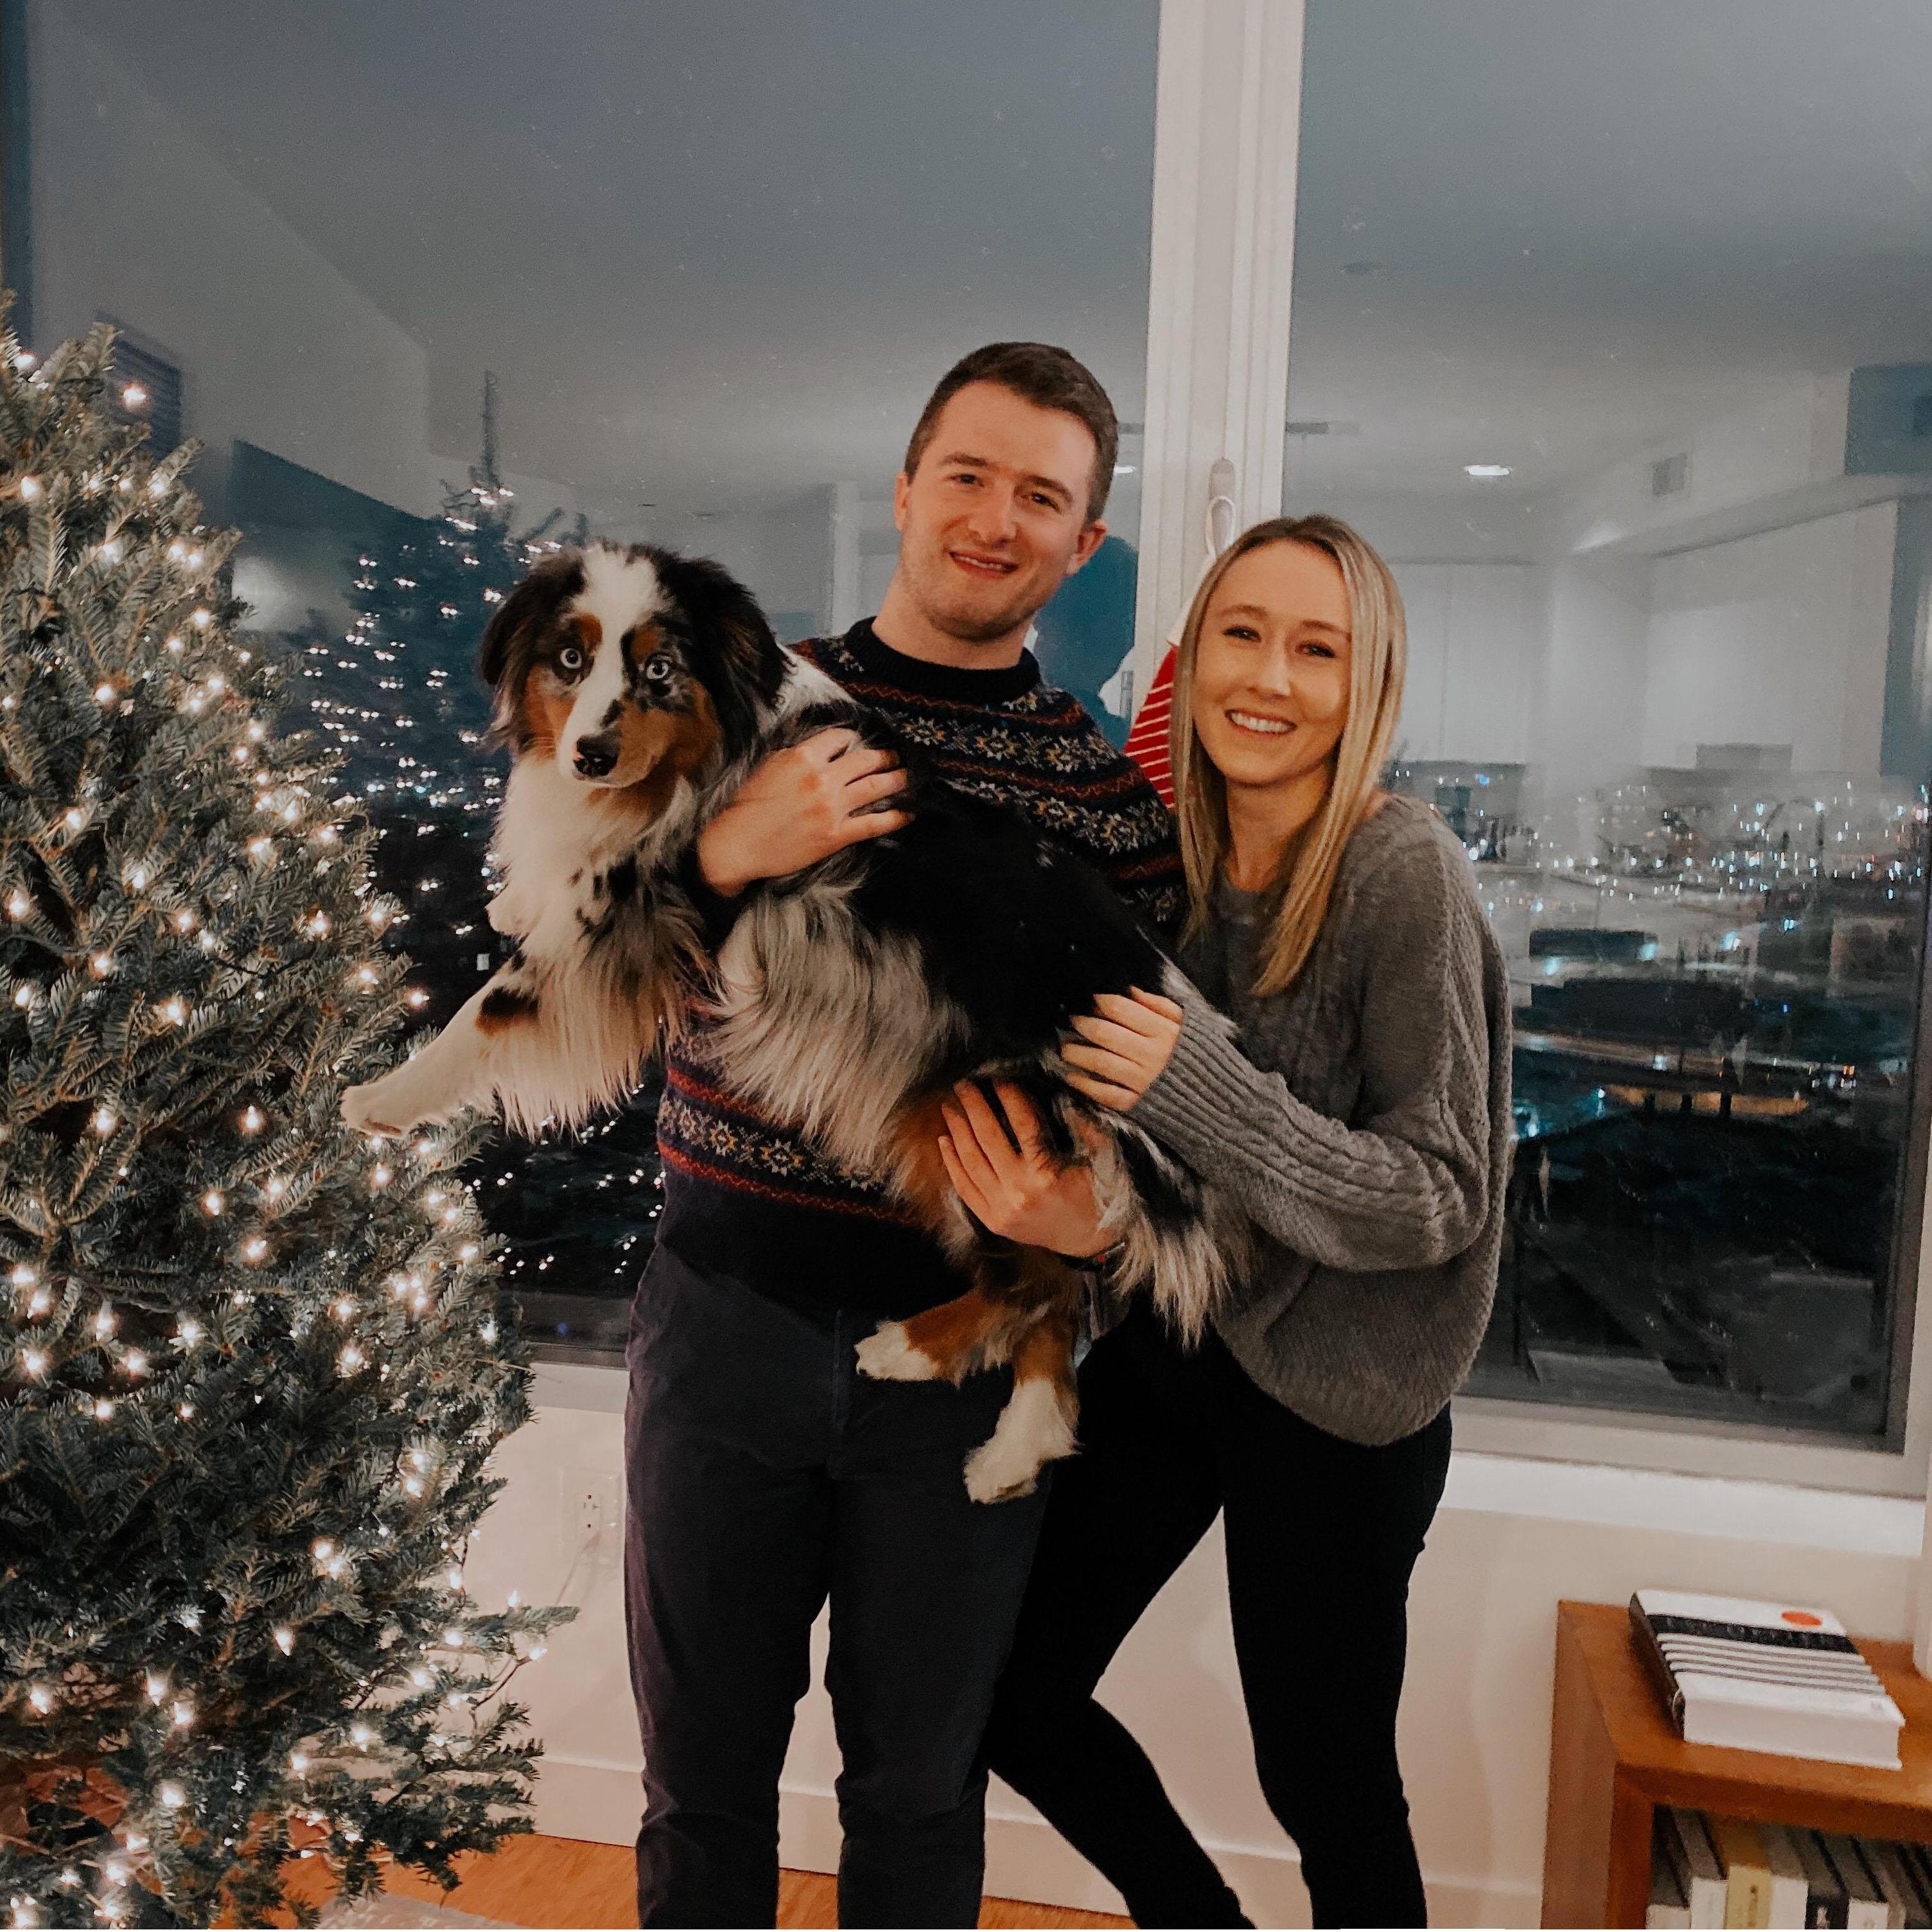 Trimming the tree with Moose! December 1st, 2019